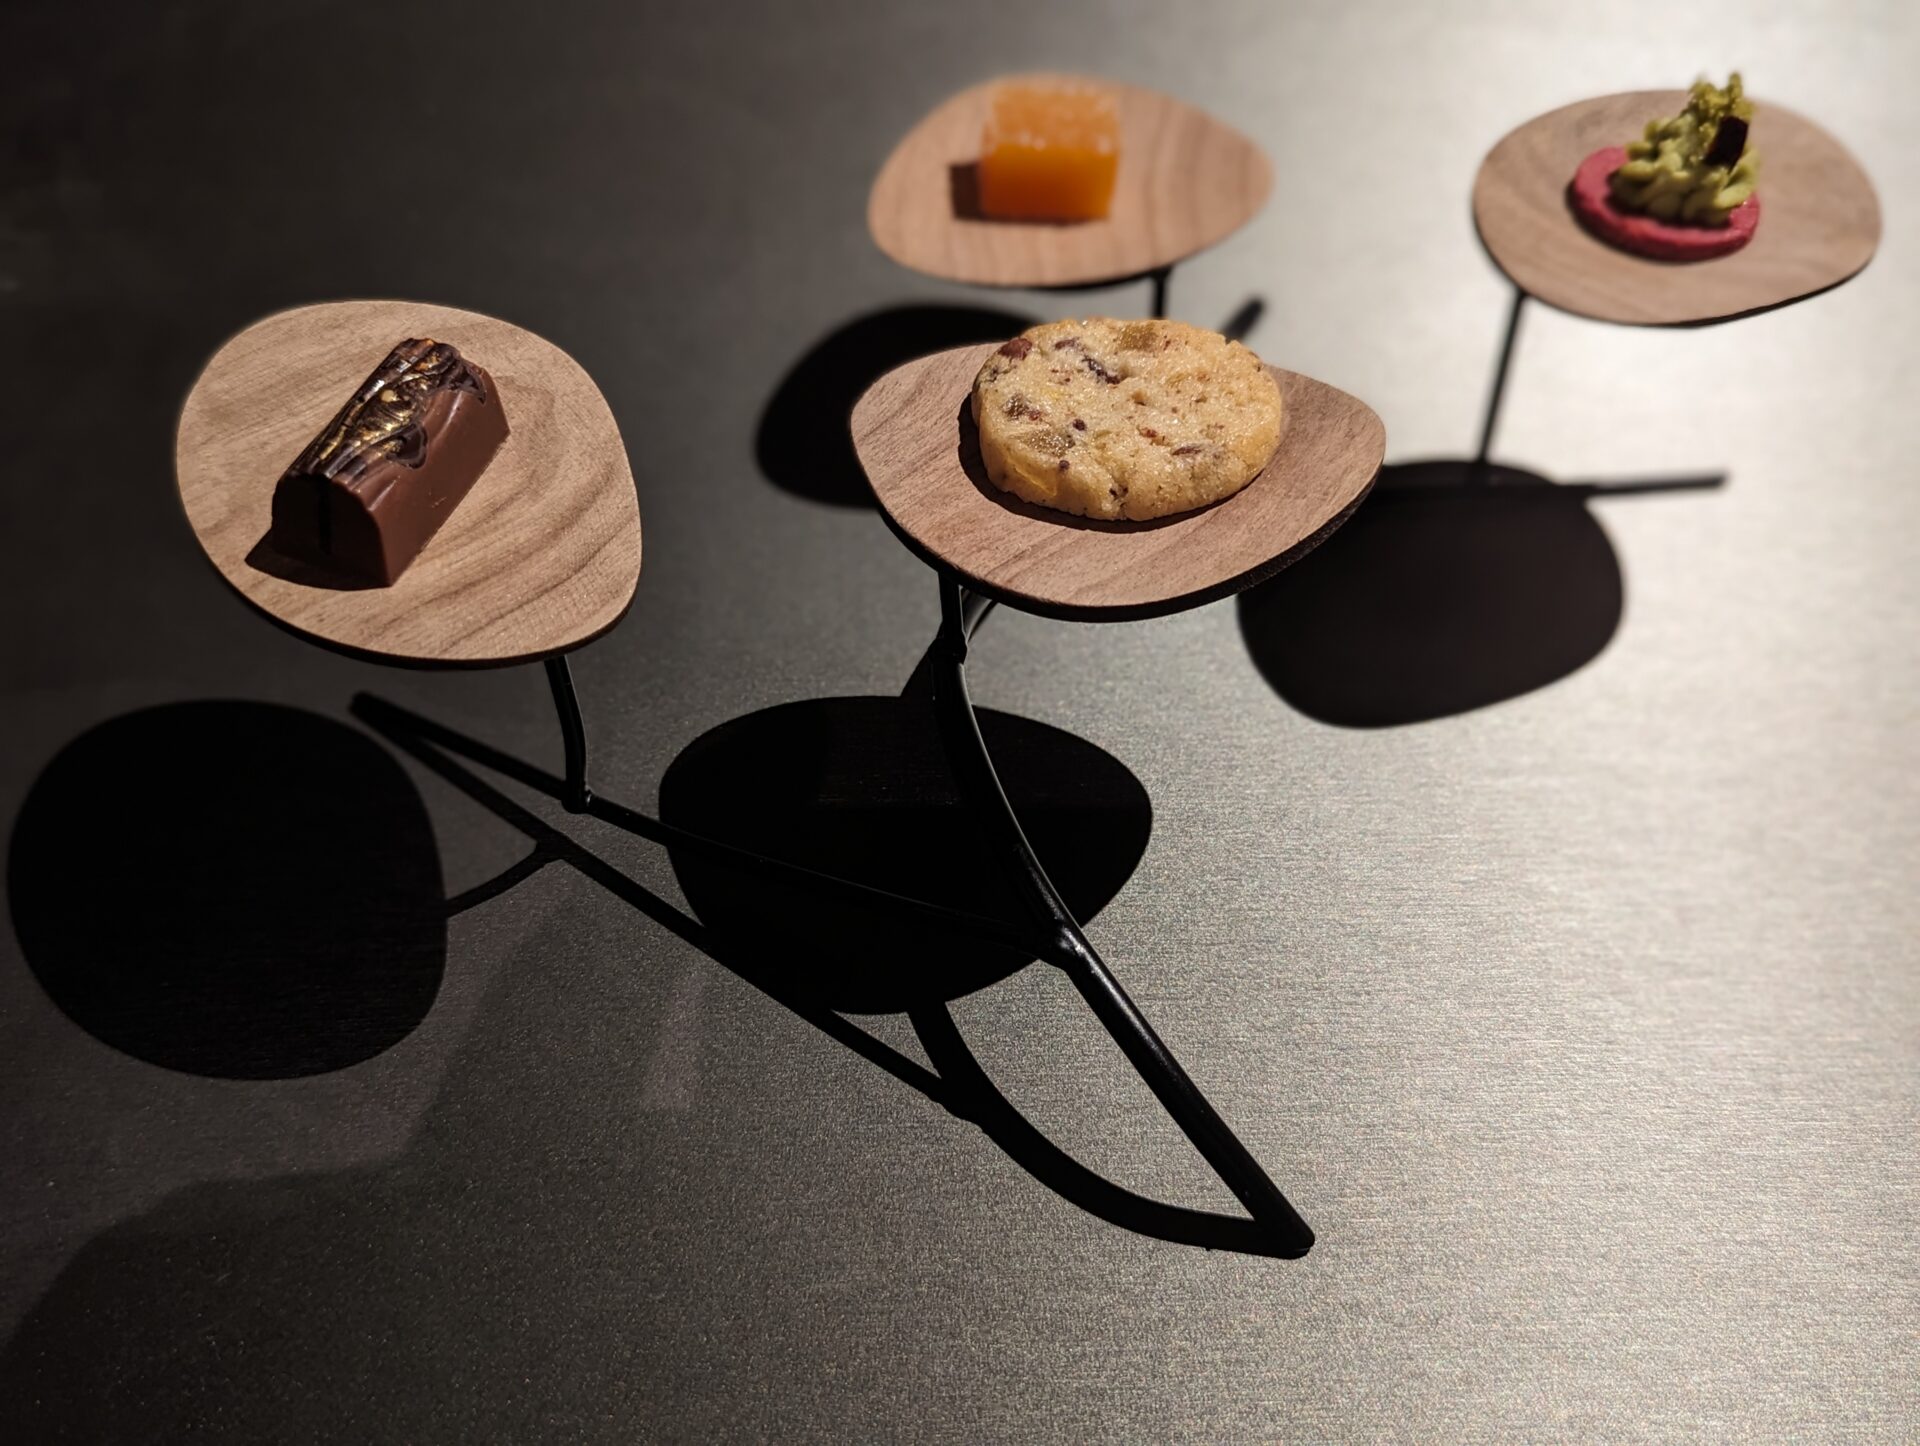 a small wooden objects with different foods on them